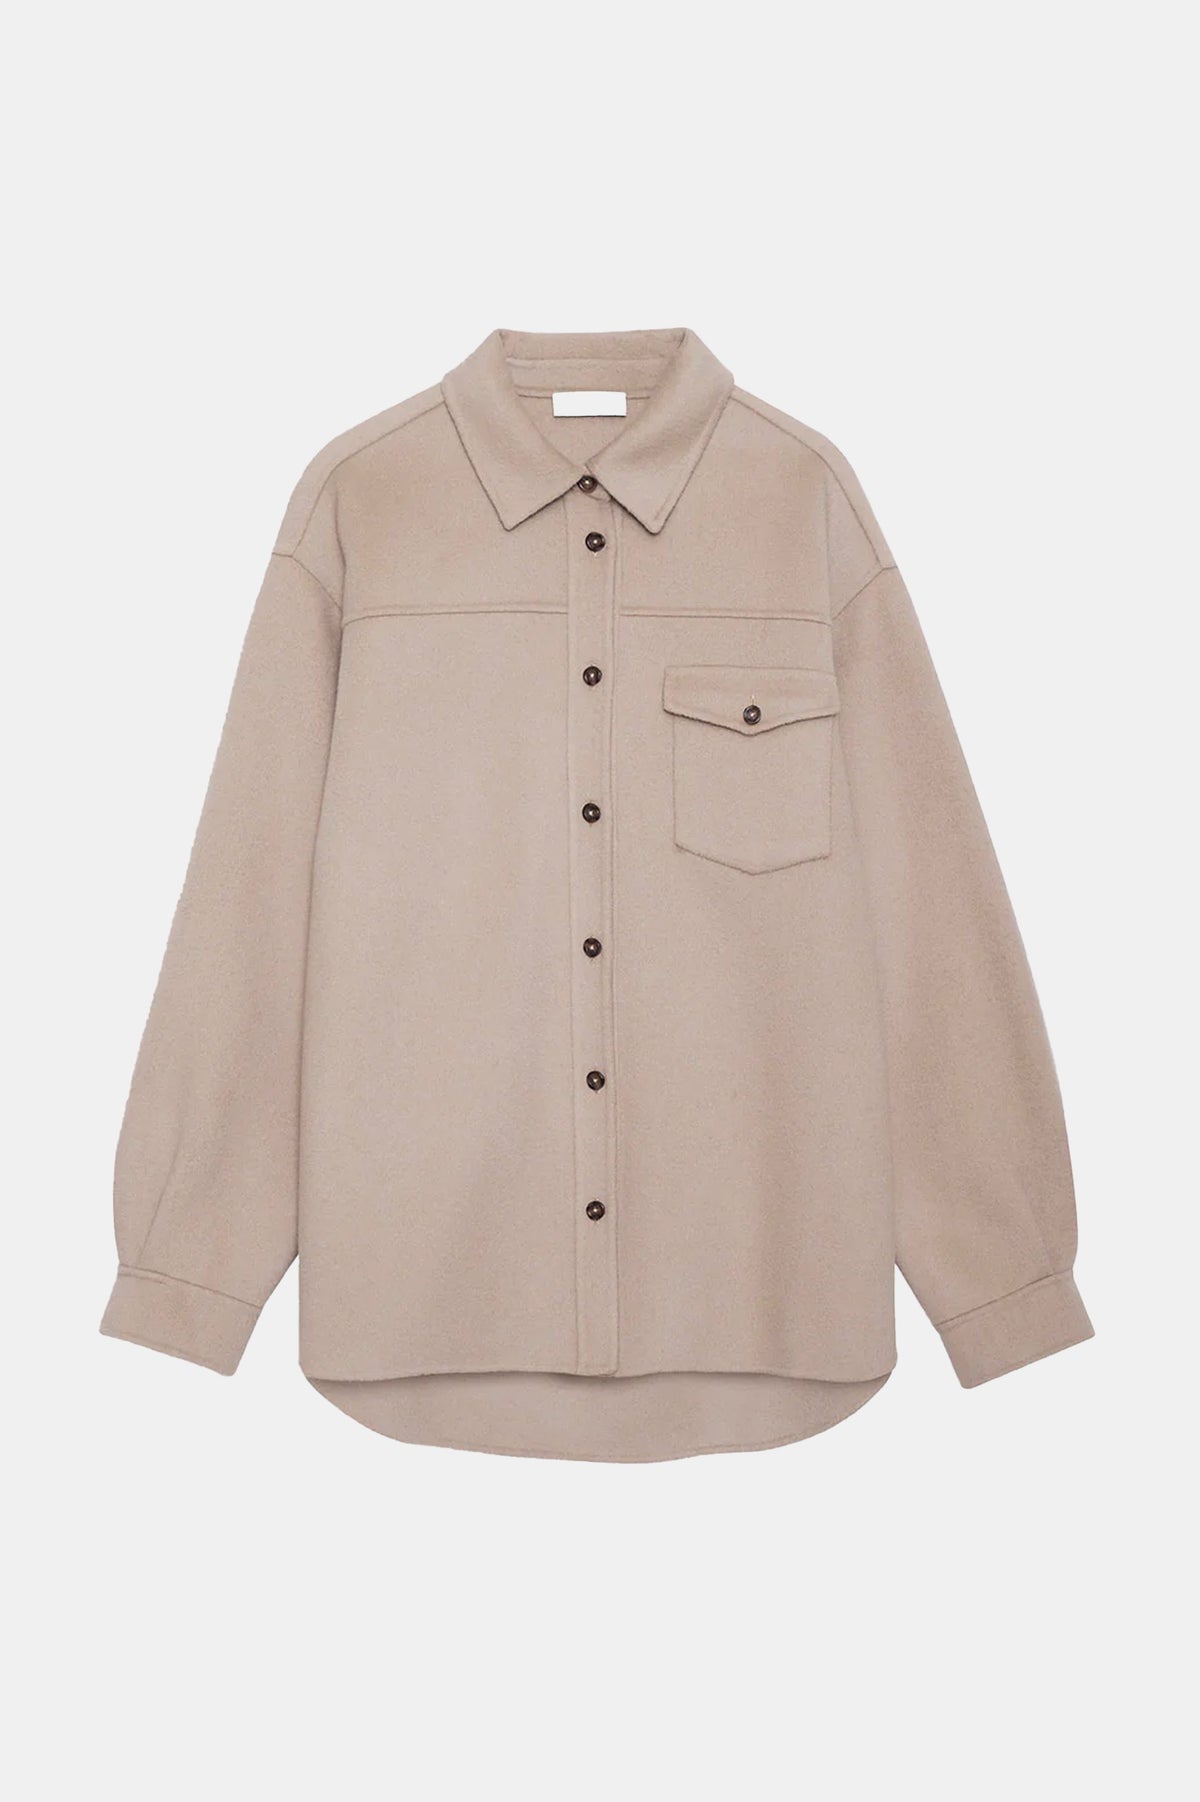 Sloan Shirt in Taupe Cashmere Blend